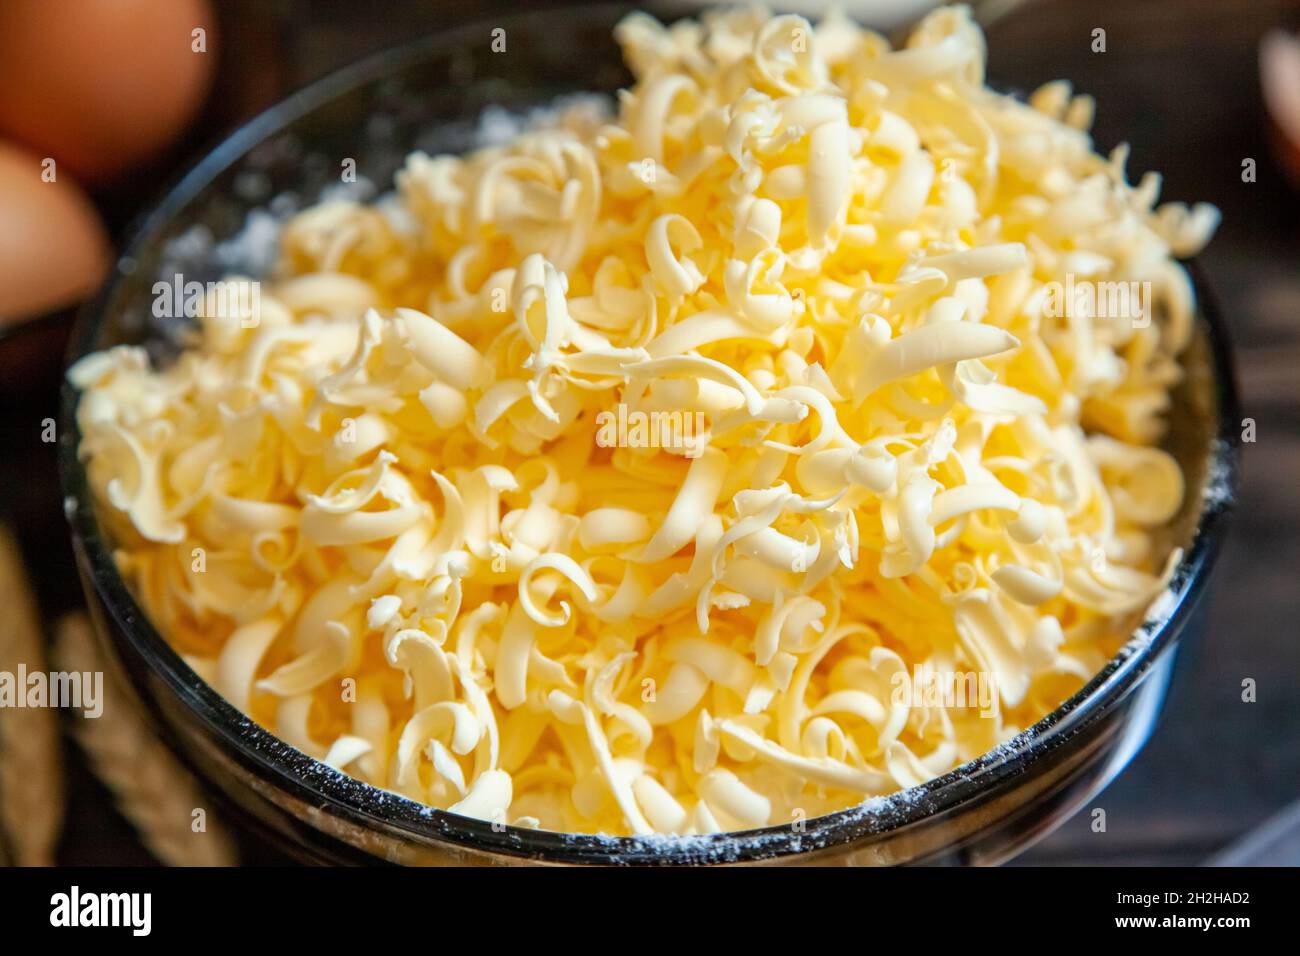 Grated butter for baking on table. Baking ingredients for shortbread pastry: grated butter, flour, eggs, sour cream close up on wooden background. Stock Photo